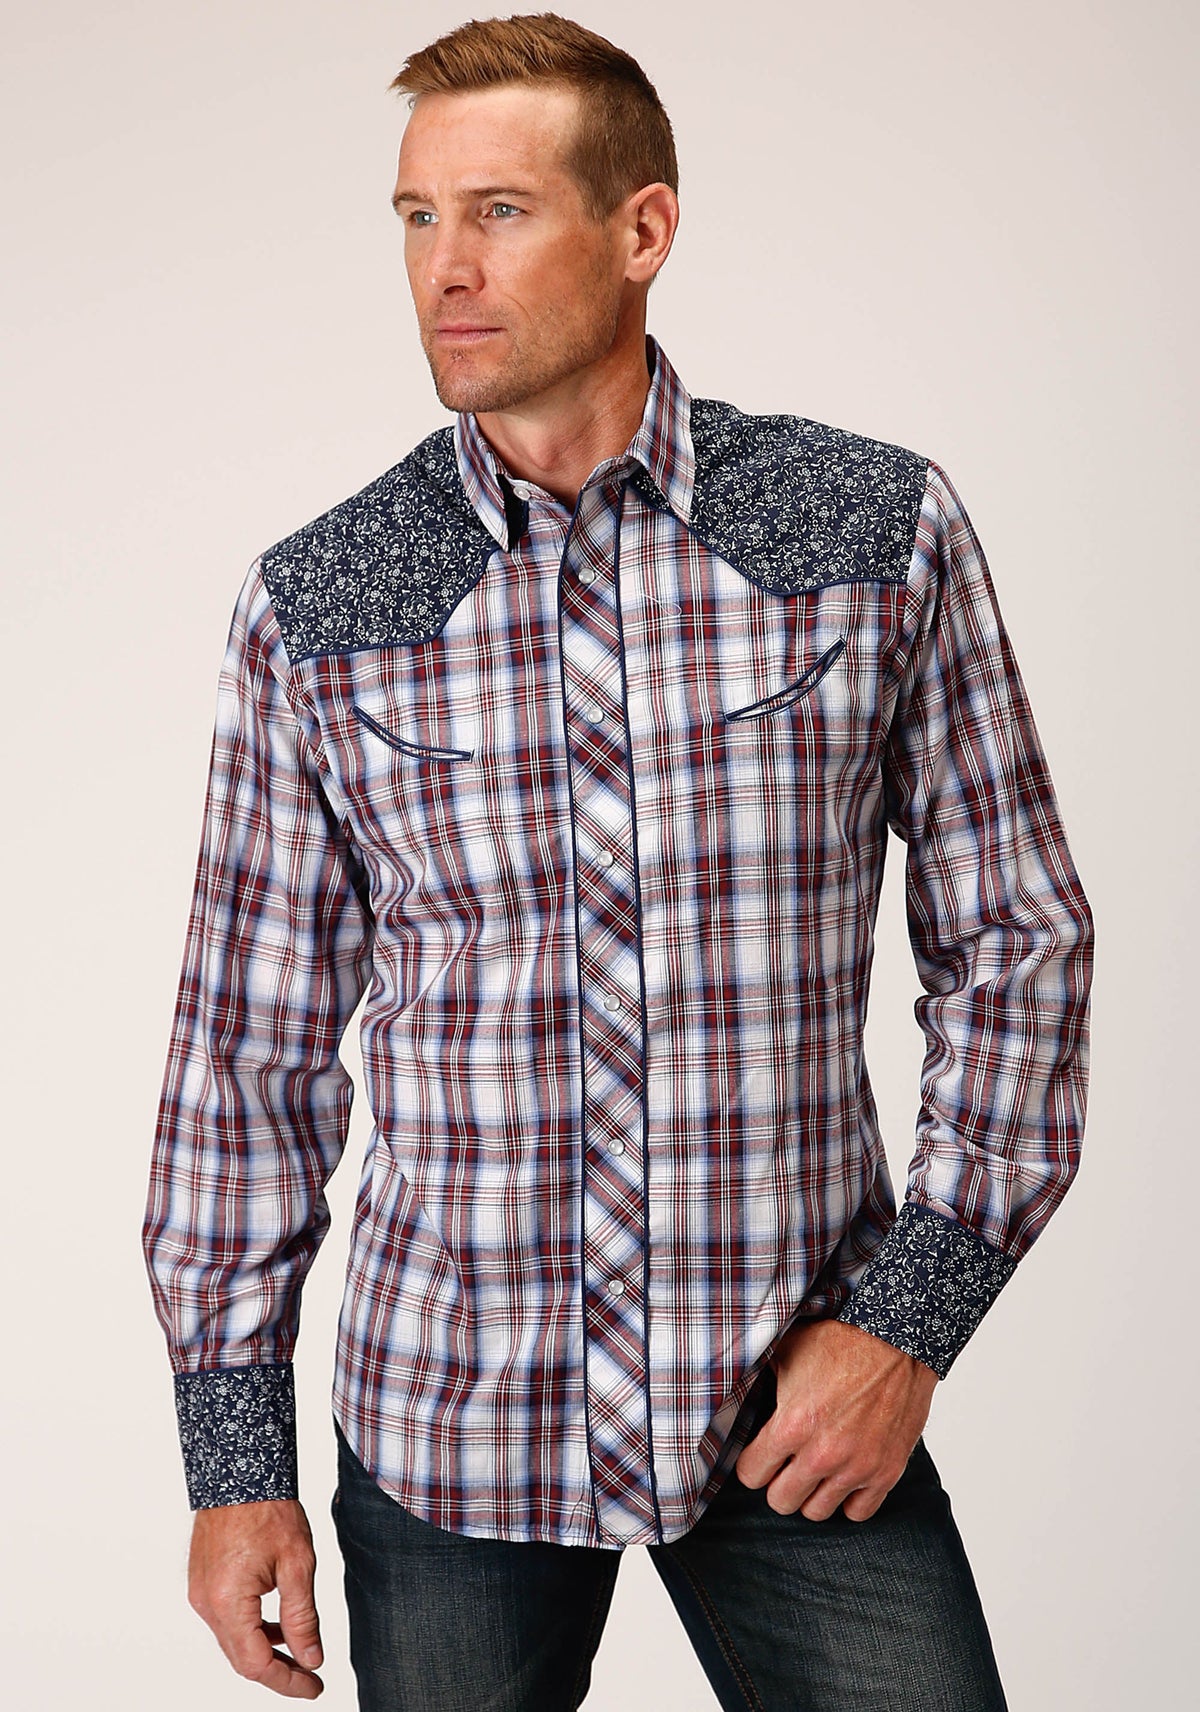 Roper Mens Long Sleeve Snap Wine Navy And White Plaid Western Shirt